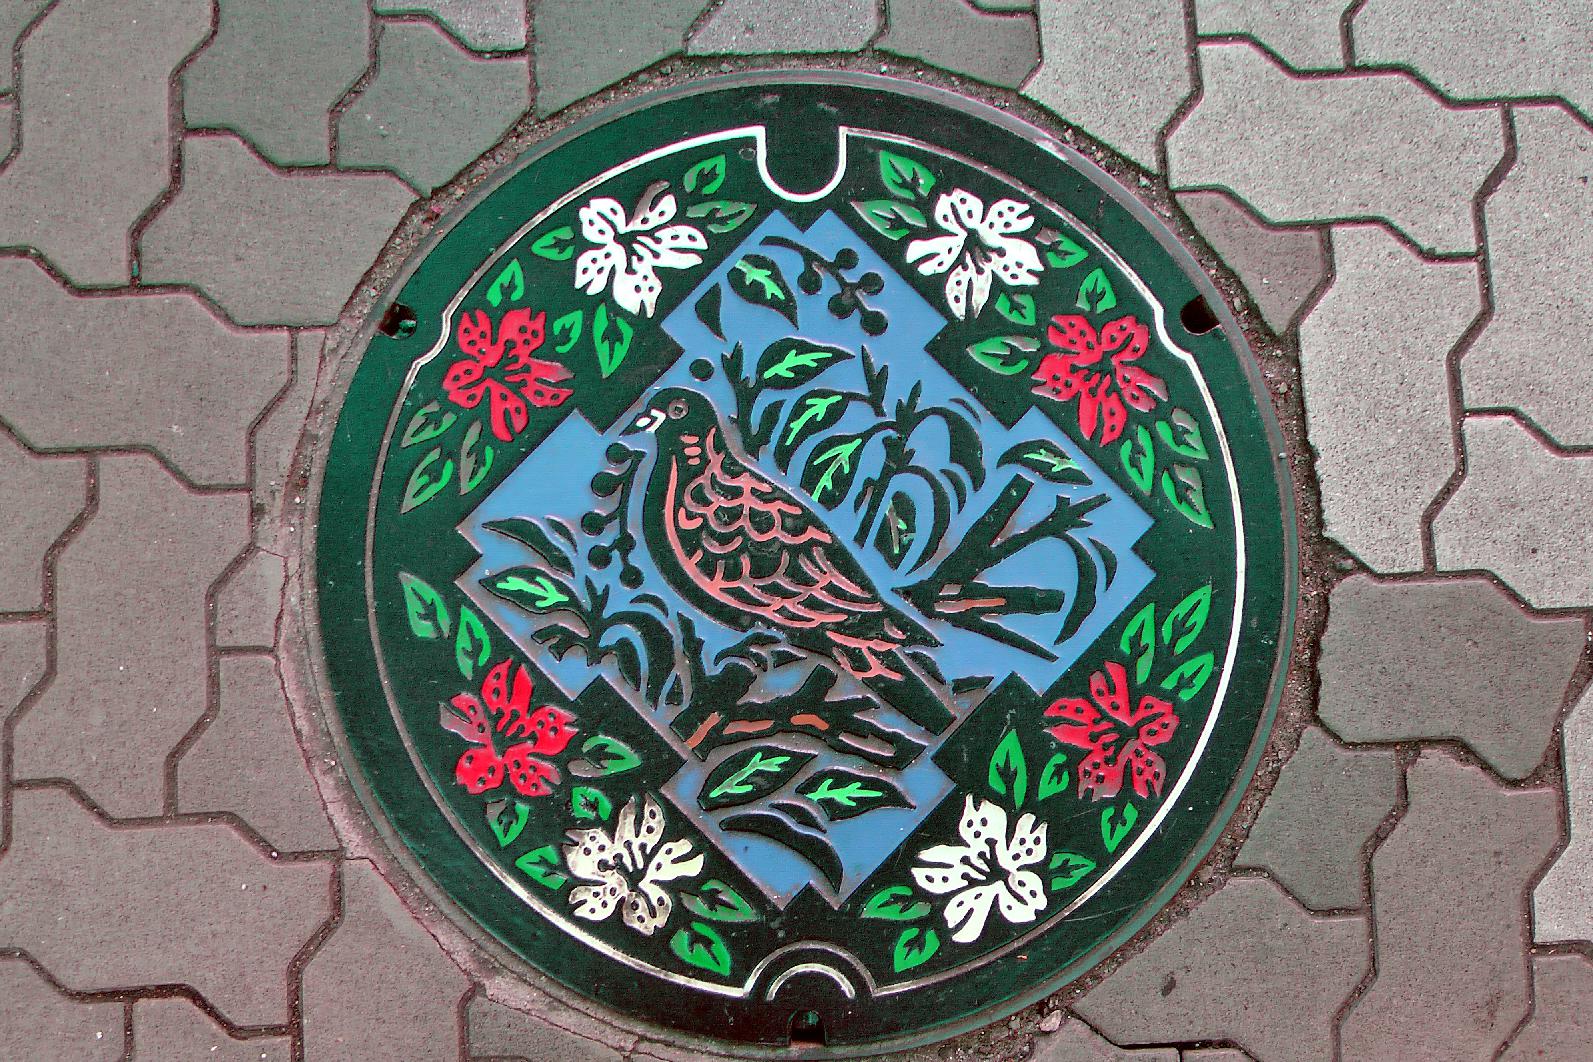 Ikeda's man hole cover